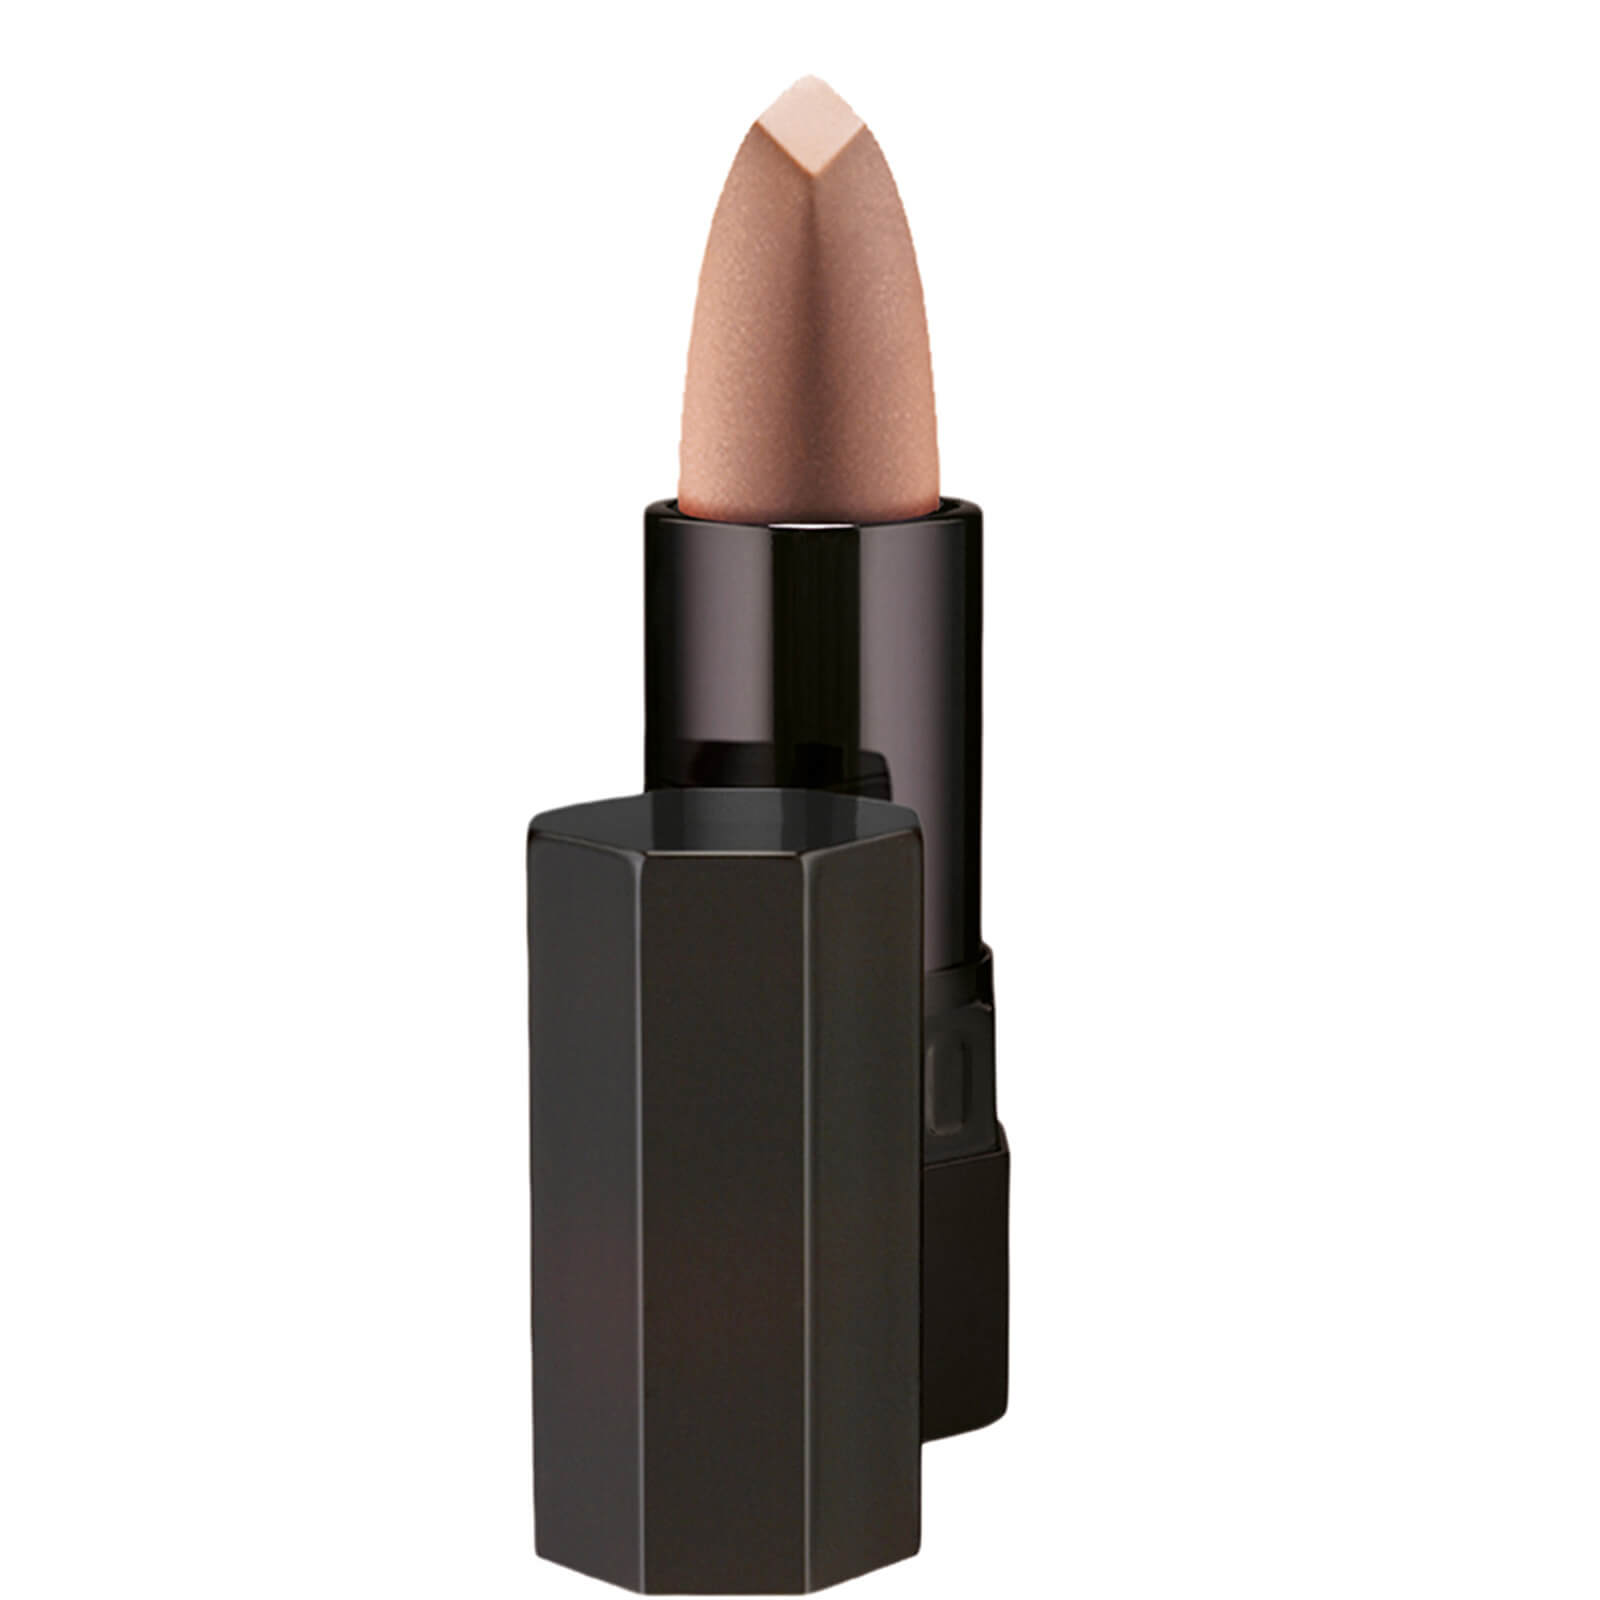 Serge Lutens Lipstick Fard a Levres 2.3g (Various Shades) - Ndeg25 Rose des glaces